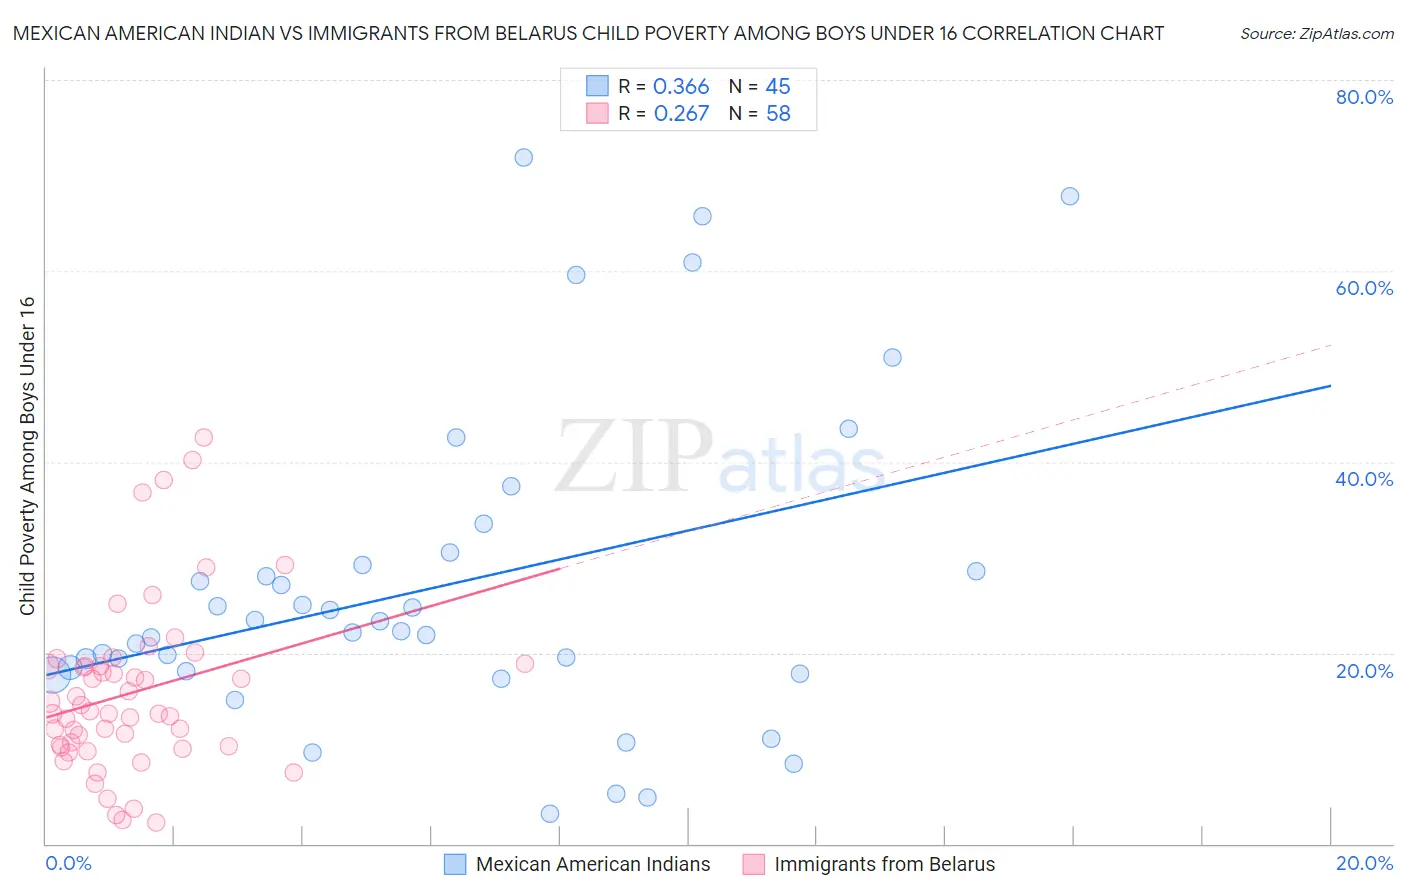 Mexican American Indian vs Immigrants from Belarus Child Poverty Among Boys Under 16